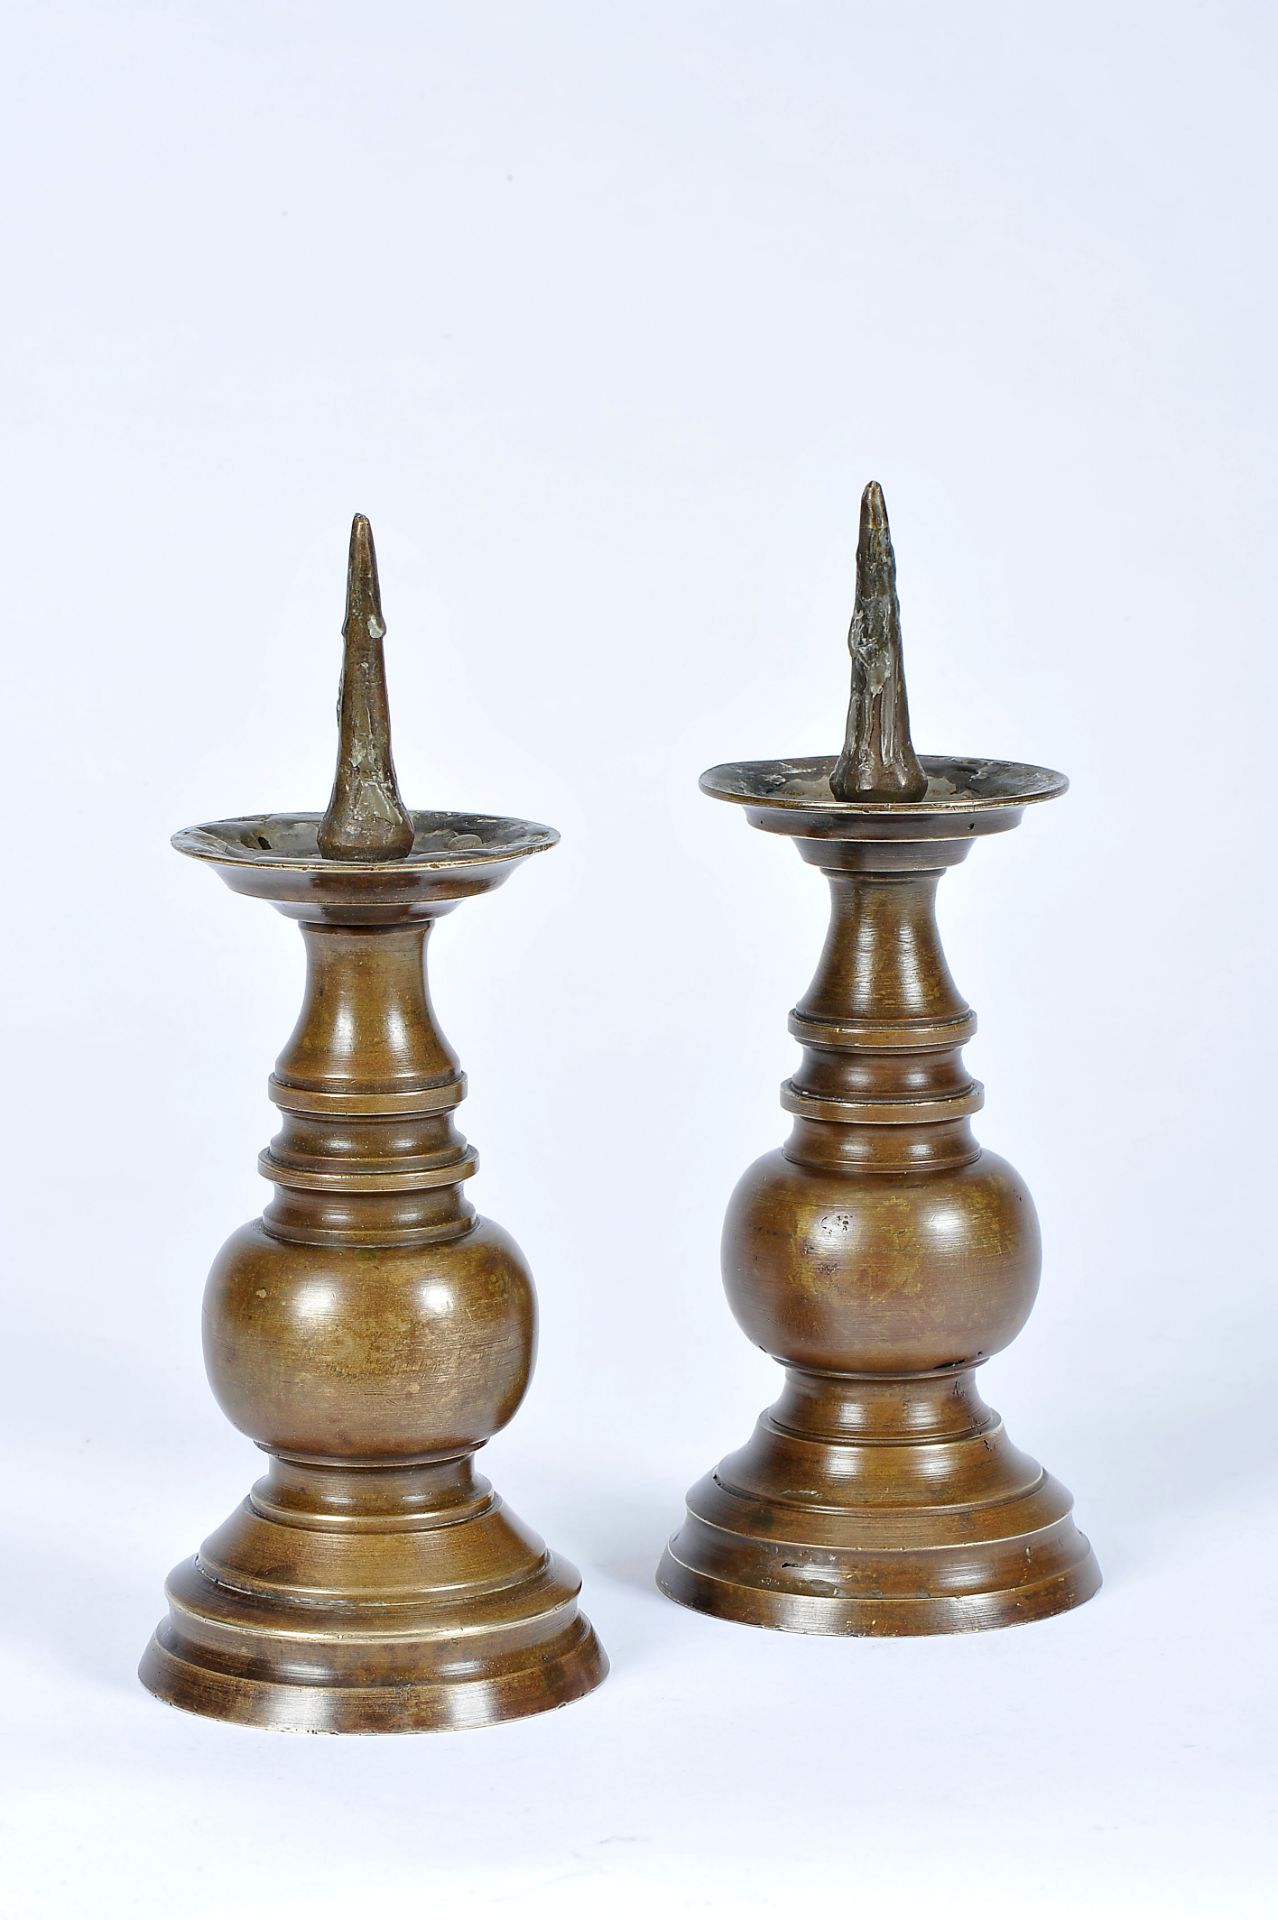 A Pair of Candlesticks with spikes, bronze, Flemish, 17th C., minor defects, Dim. - 19,5 cm